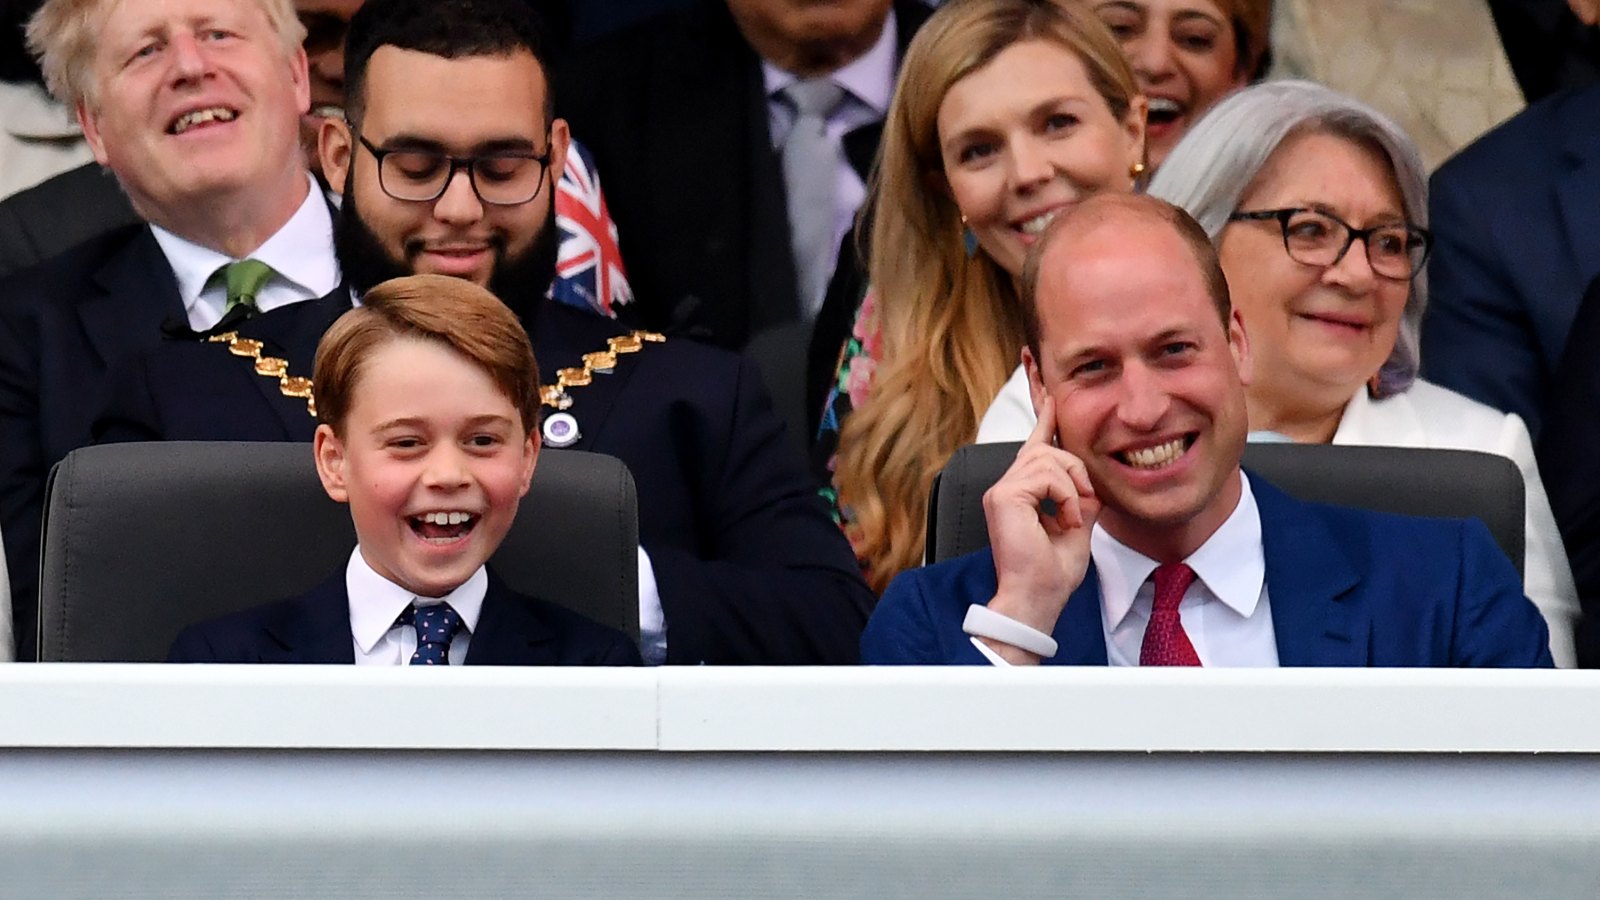 Prince William Shares Silly Father's Day Photo